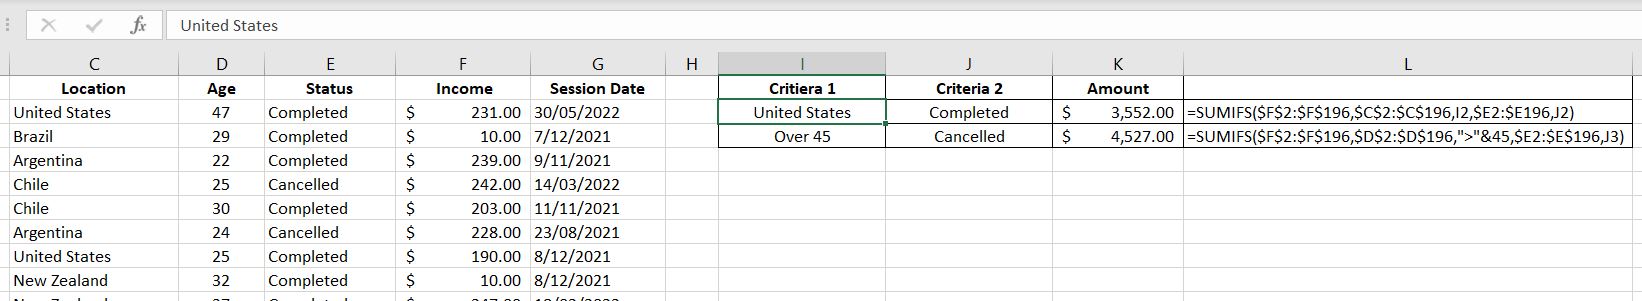 Excel-SUMIFS-function-multiple conditions